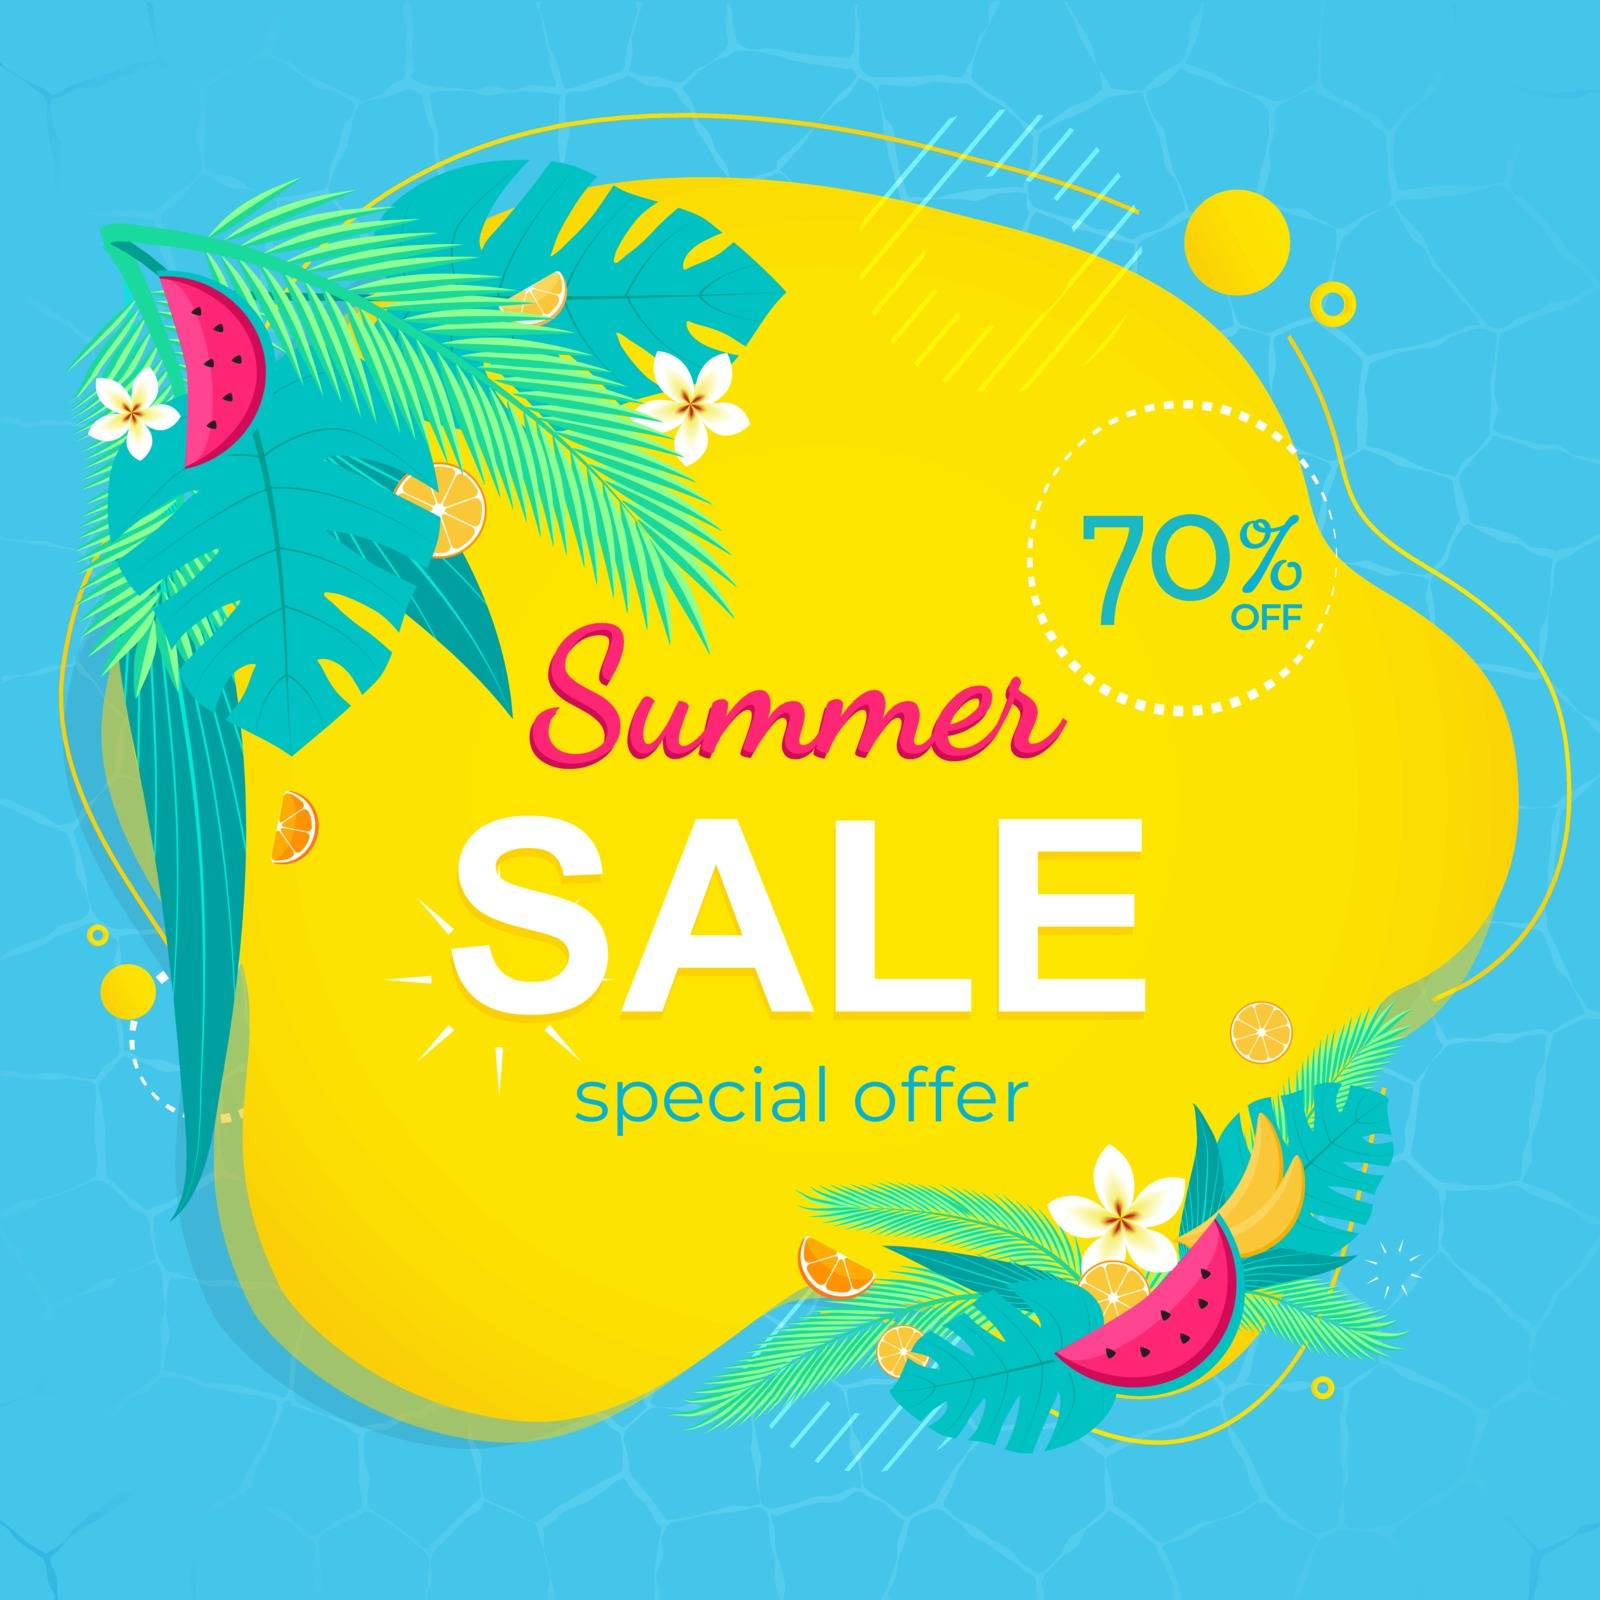 Summer sale banner template. Summer abstract geometric background with palm leaves, tropical fruits. Tropical background. Promo badge for your seasonal design. Vector illustration. Design for social media banner, poster, email, newsletter, ad, leaflet, placard, brochure, flyer, web sticker